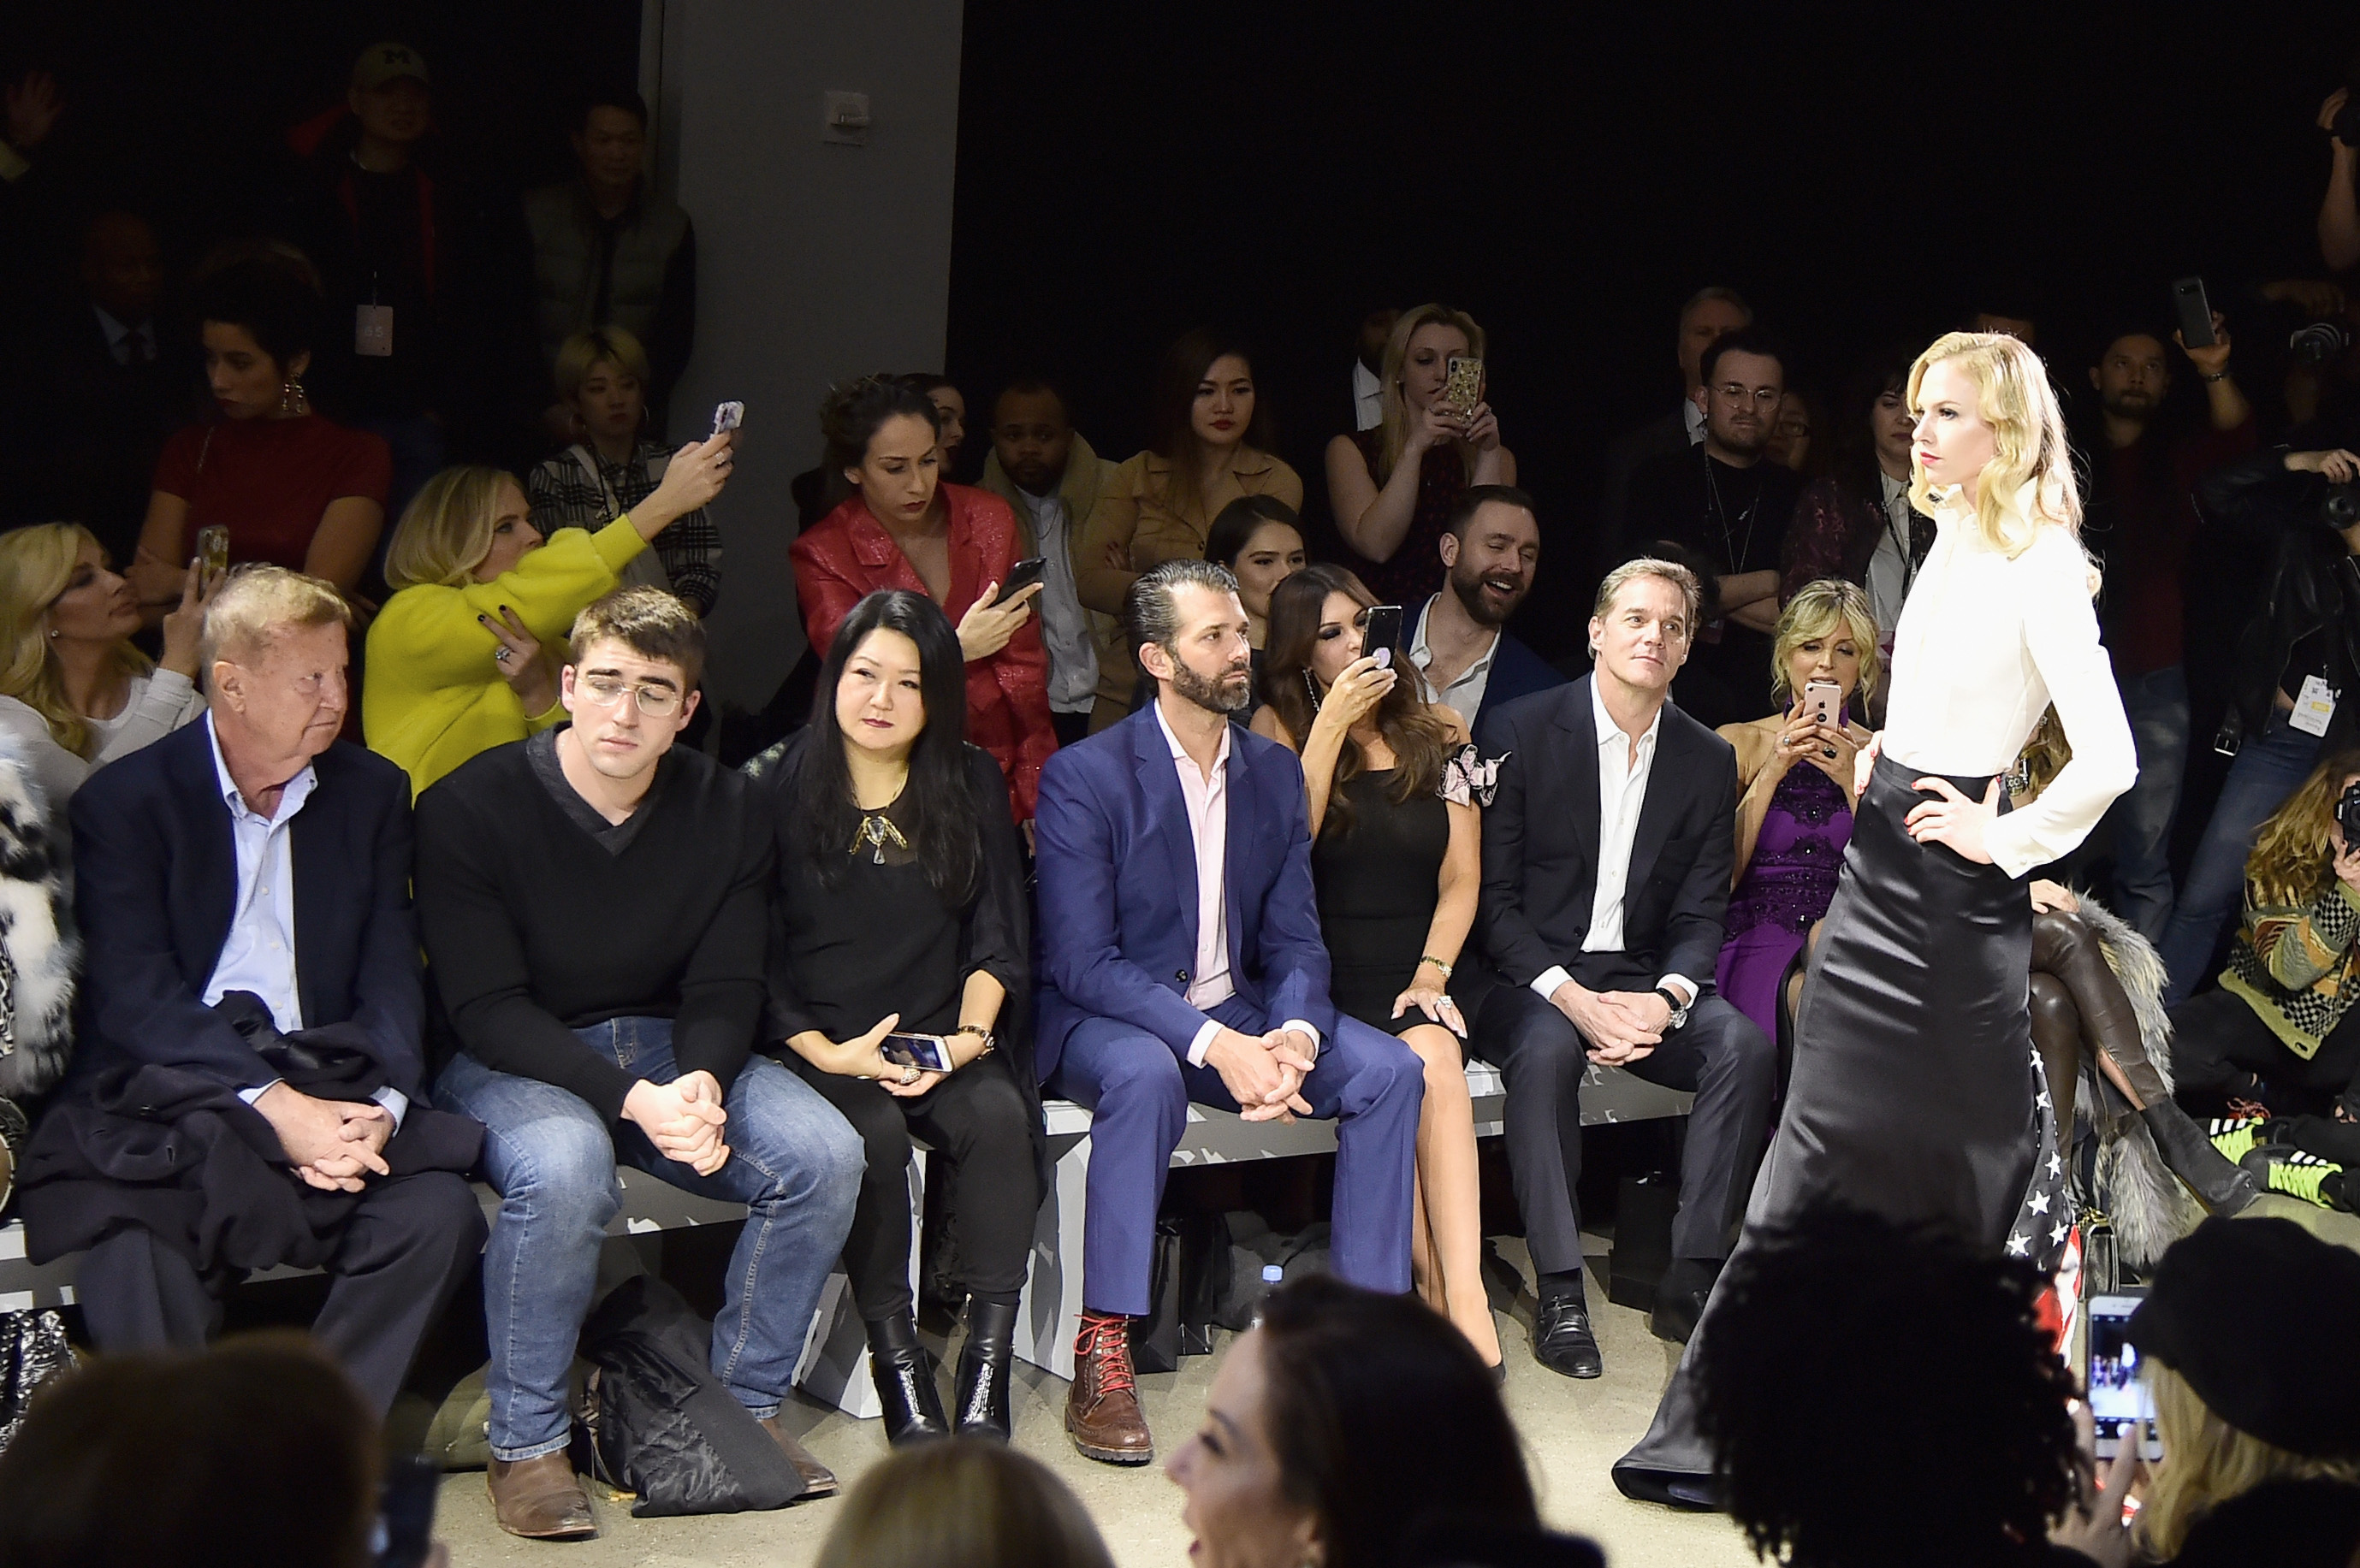 Susan Shin, Donald Trump Jr., Kimberly Guilfoyle, Bill Hemmer, and Marla Maples attend the Zang Toi runway show in Gallery II in Spring Studios during New York Fashion Week on February 13, 2019, in New York City. | Source: Getty Images